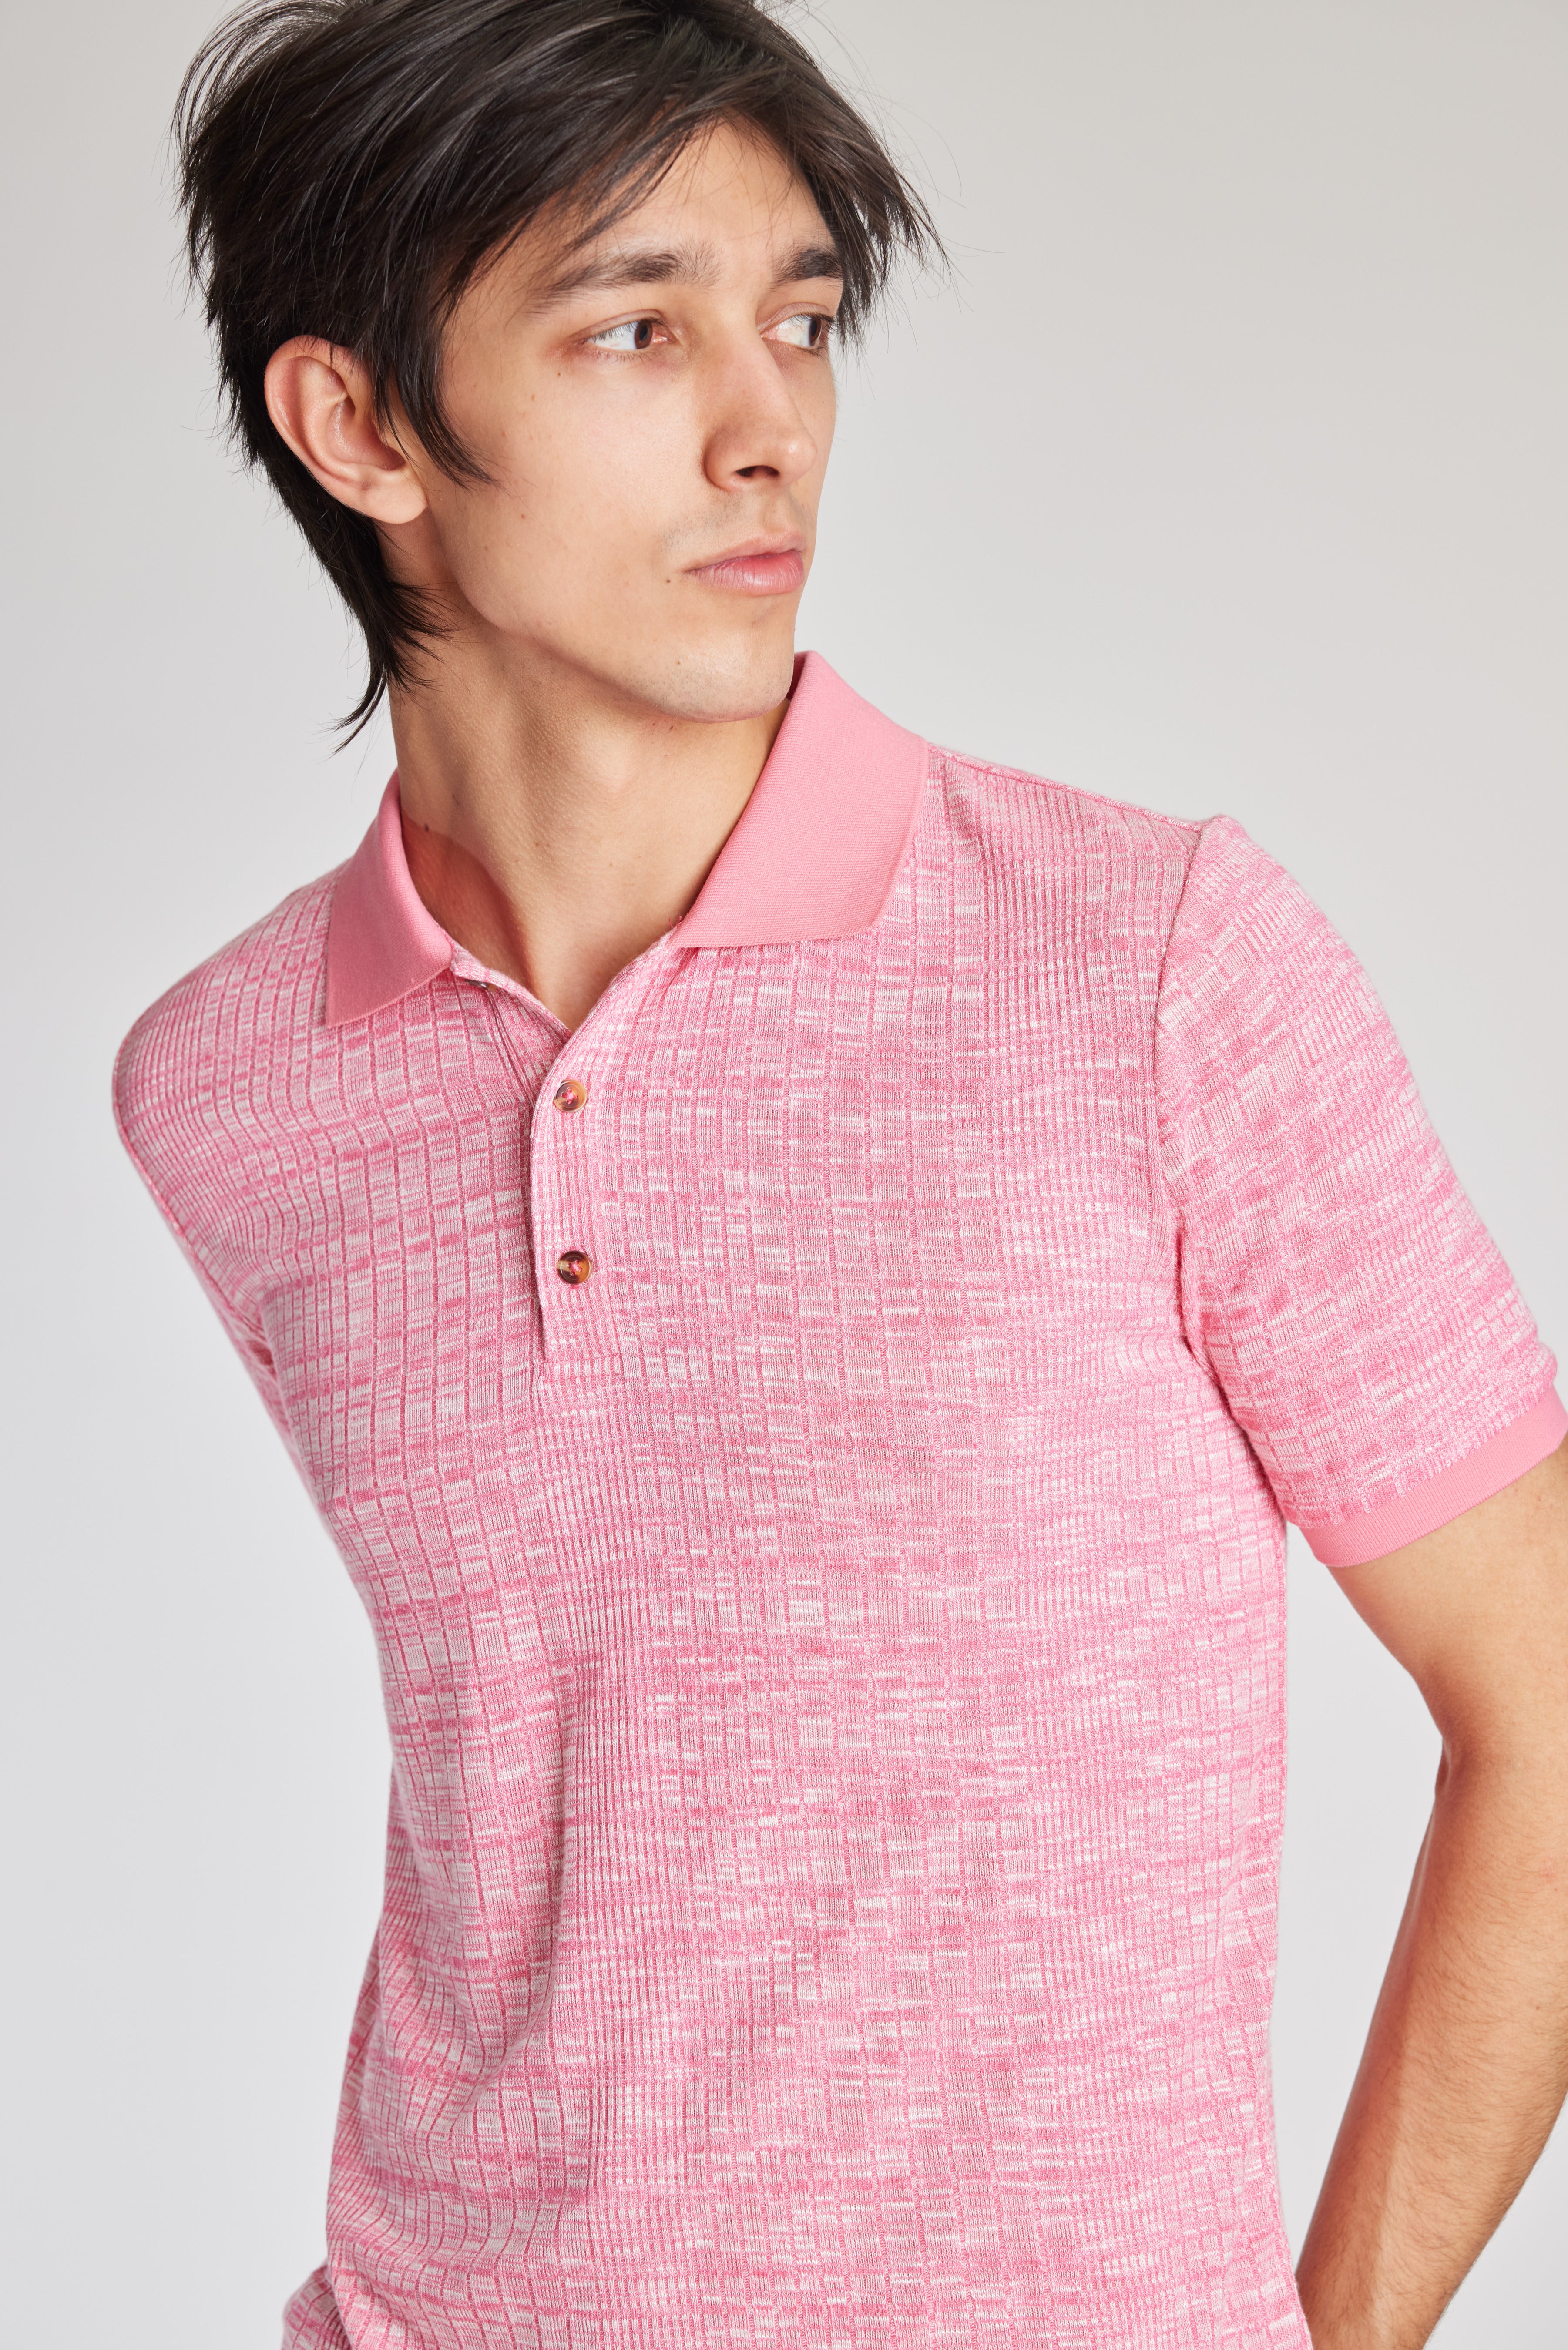 Funday Variegated Polo - Hot Pink